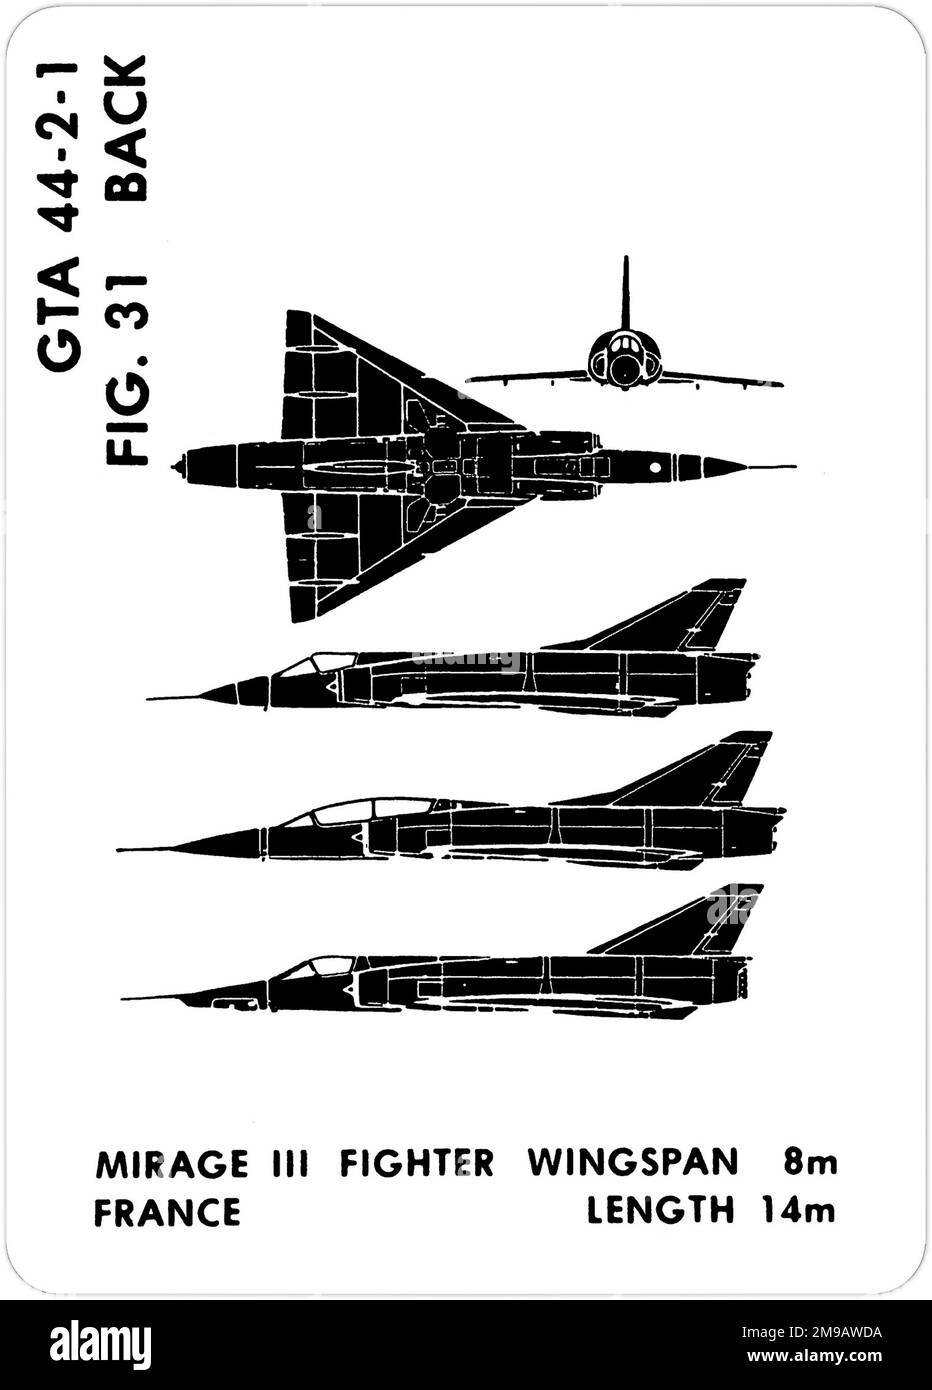 Dassault Mirage IIIC & IIIB & IIIR. This is one of the series of Graphics Training Aids (GTA) used by the United States Army to train their personnel to recognize friendly and hostile aircraft. This particular set, GTA 44-2-1, was issued in July1977. The set features aircraft from: Canada, Italy, United Kingdom, United States, and the USSR. Stock Photo